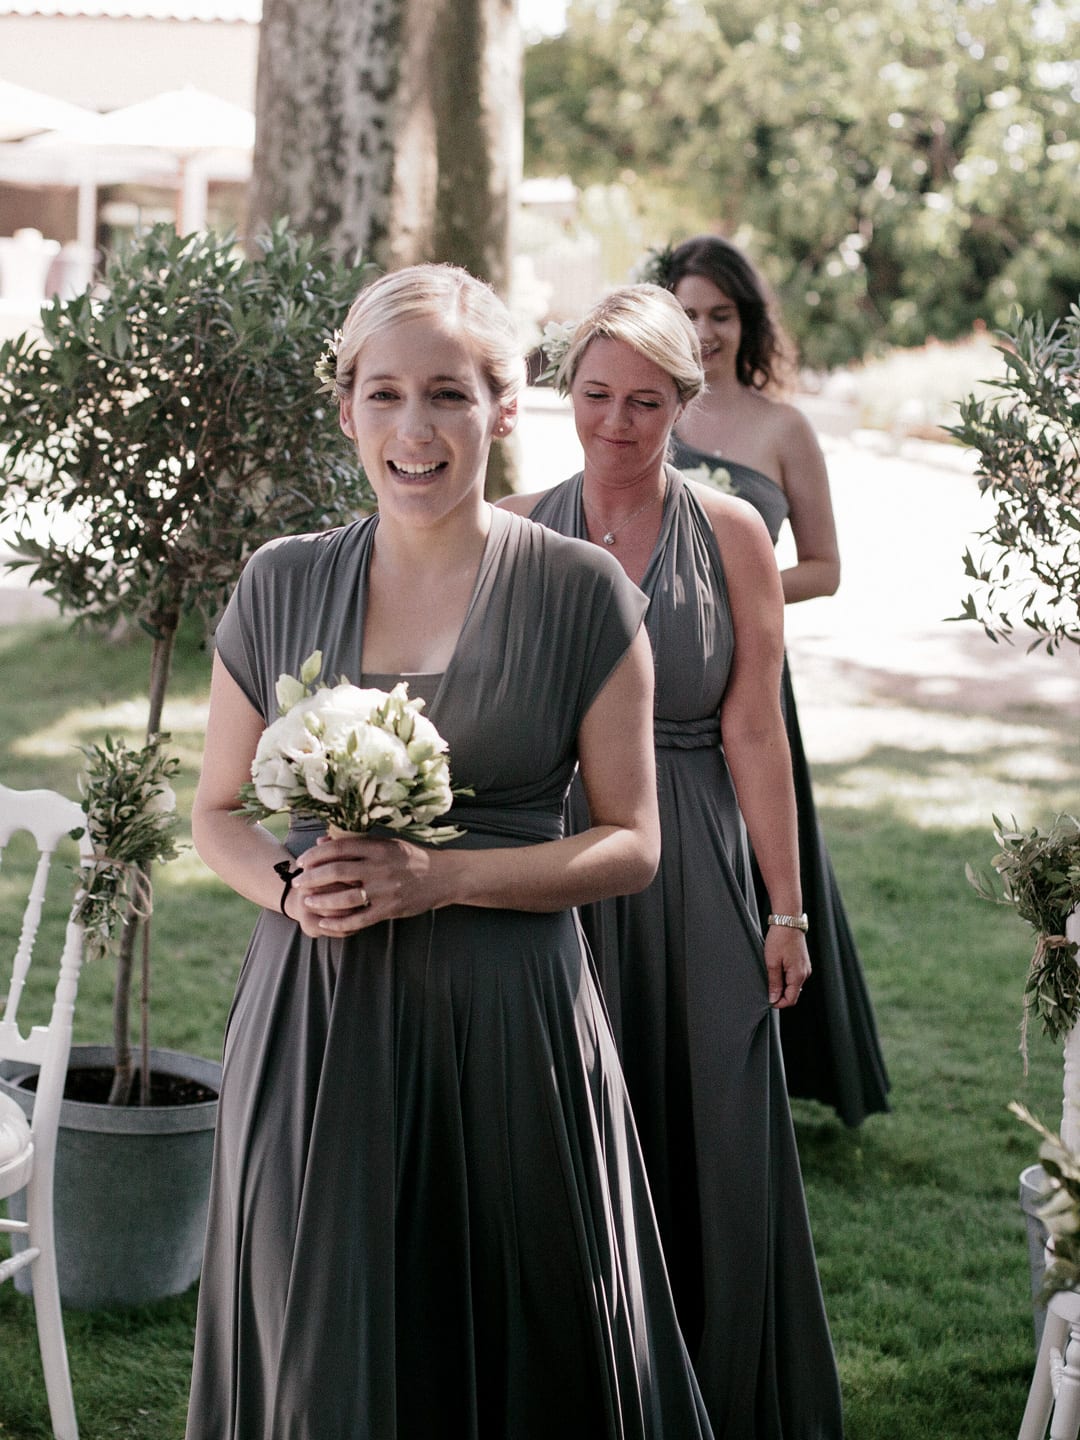 My bridesmaids walking up the aisle in sage green dresses